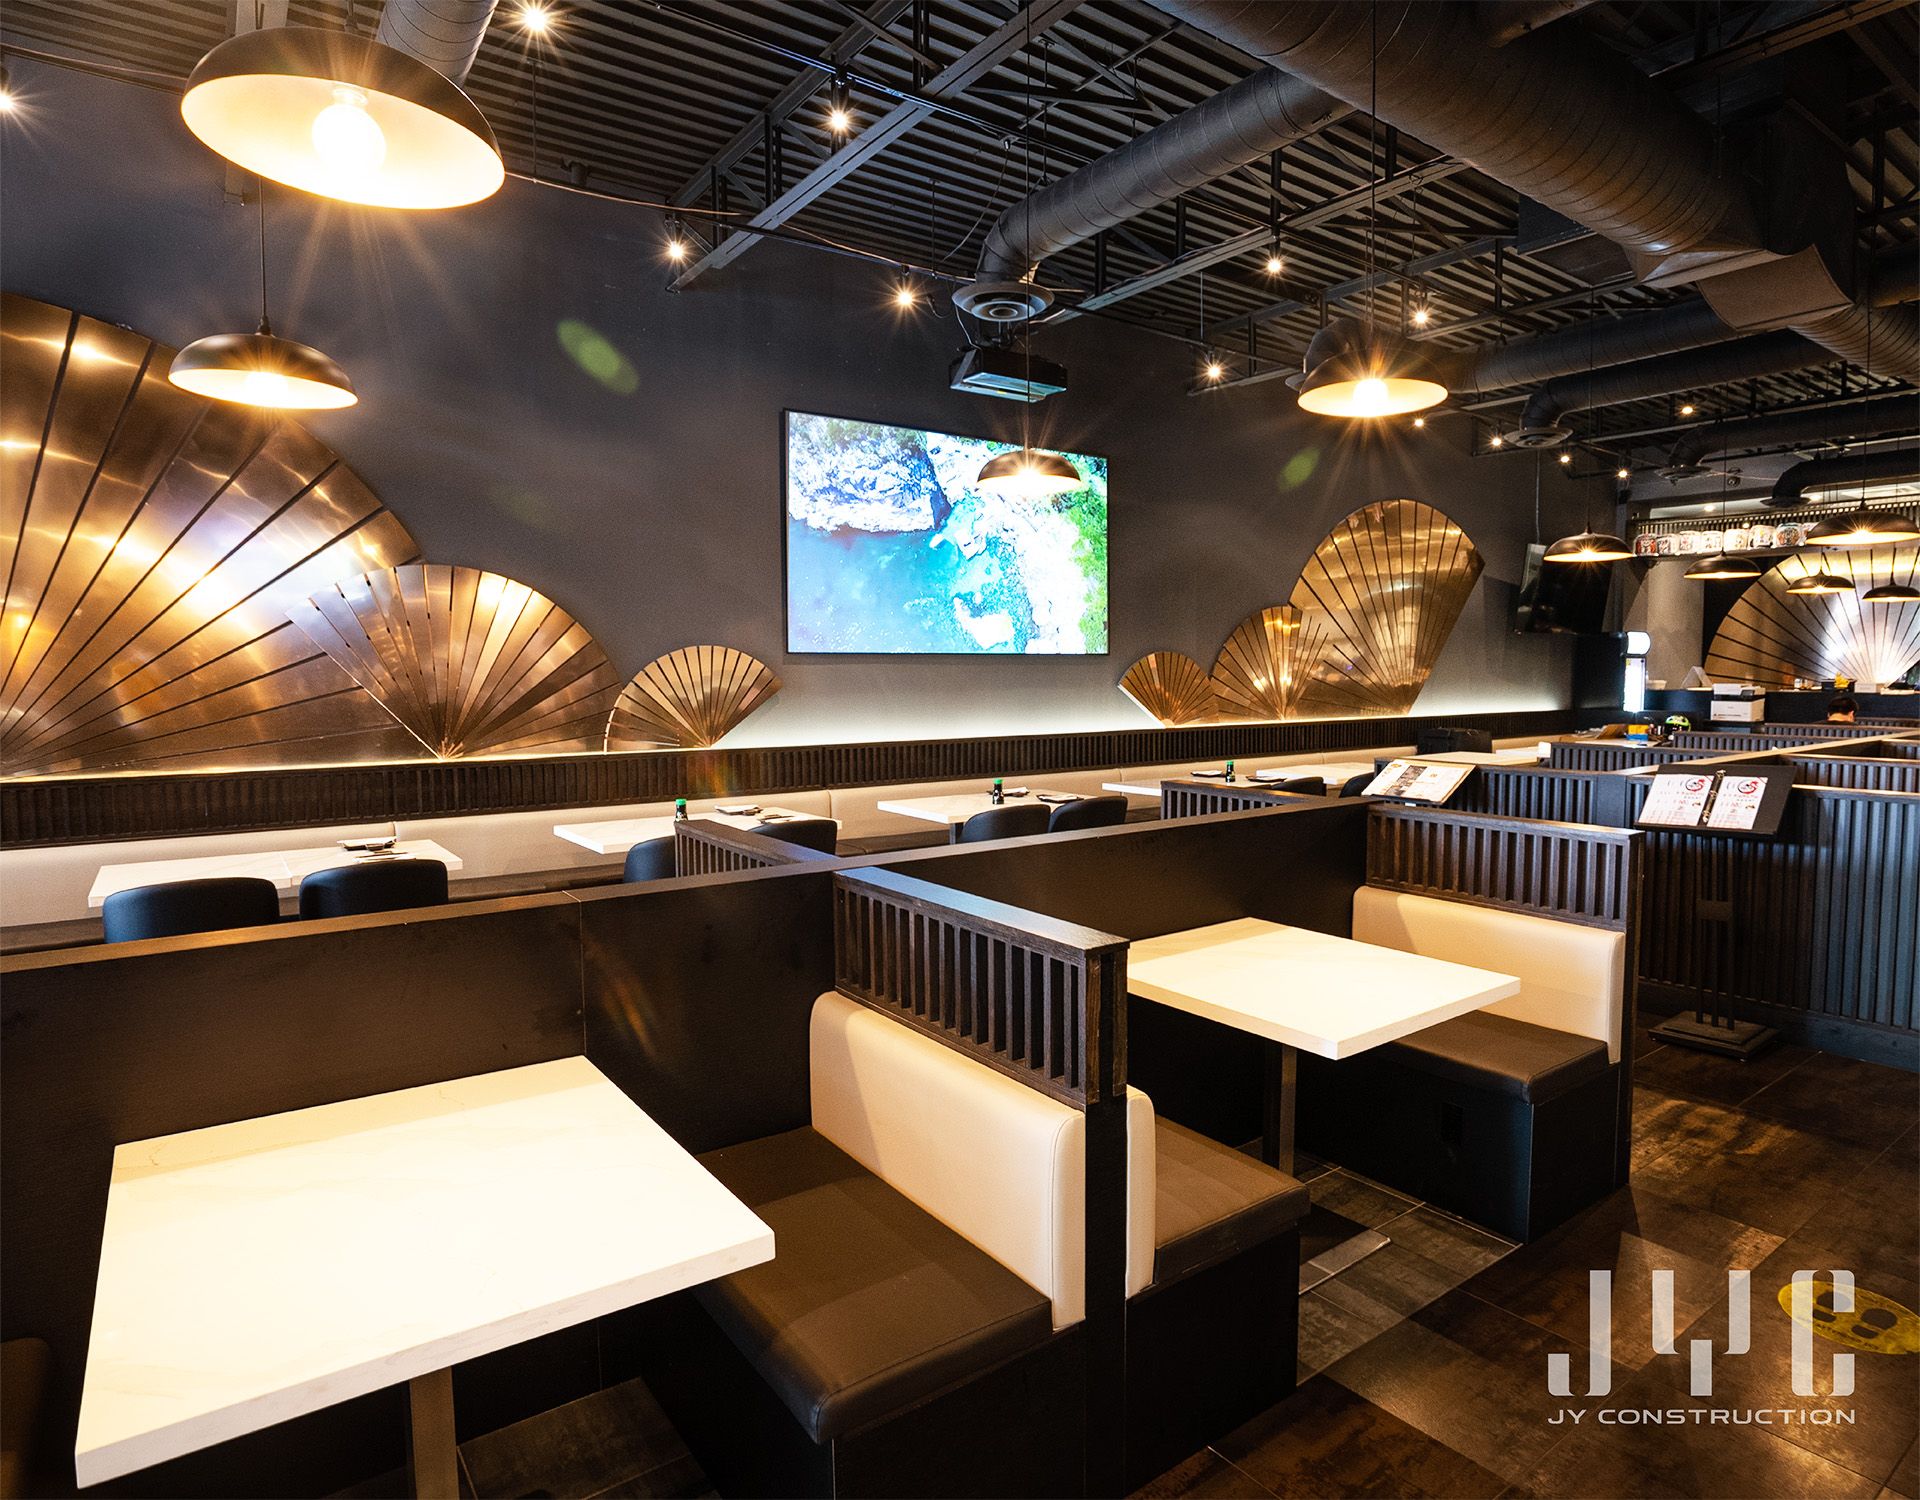 kung-fu-sushi-japanese-restaurant-renovation-in-north-york-by-jy-construction-in-english-4.jpg